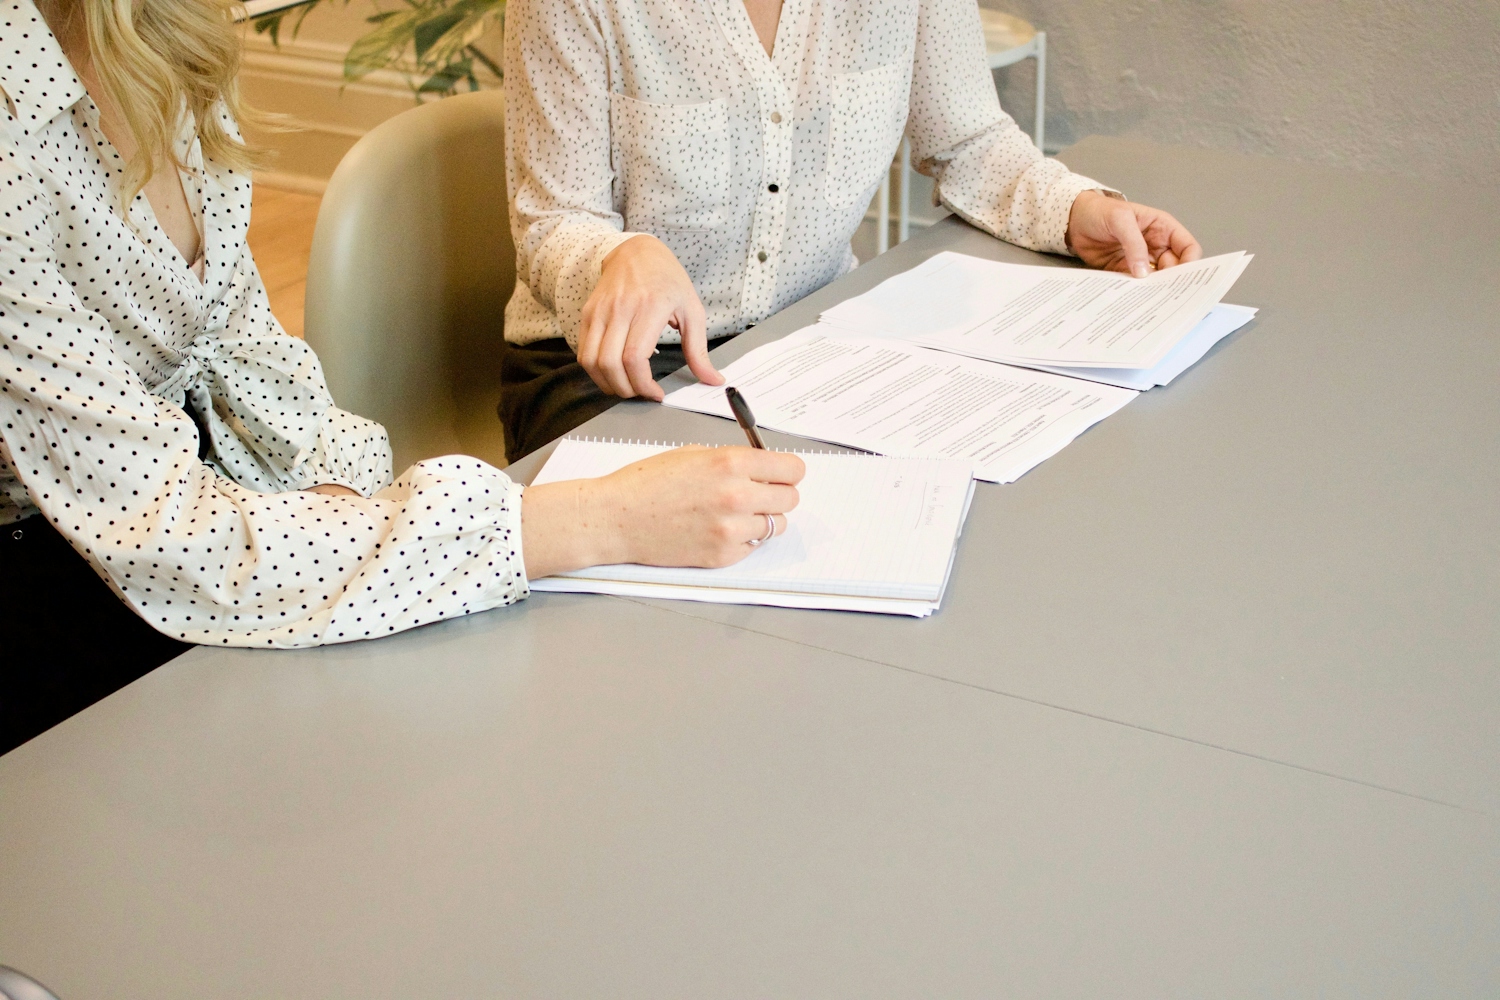 Two women reviewing papers in an interview